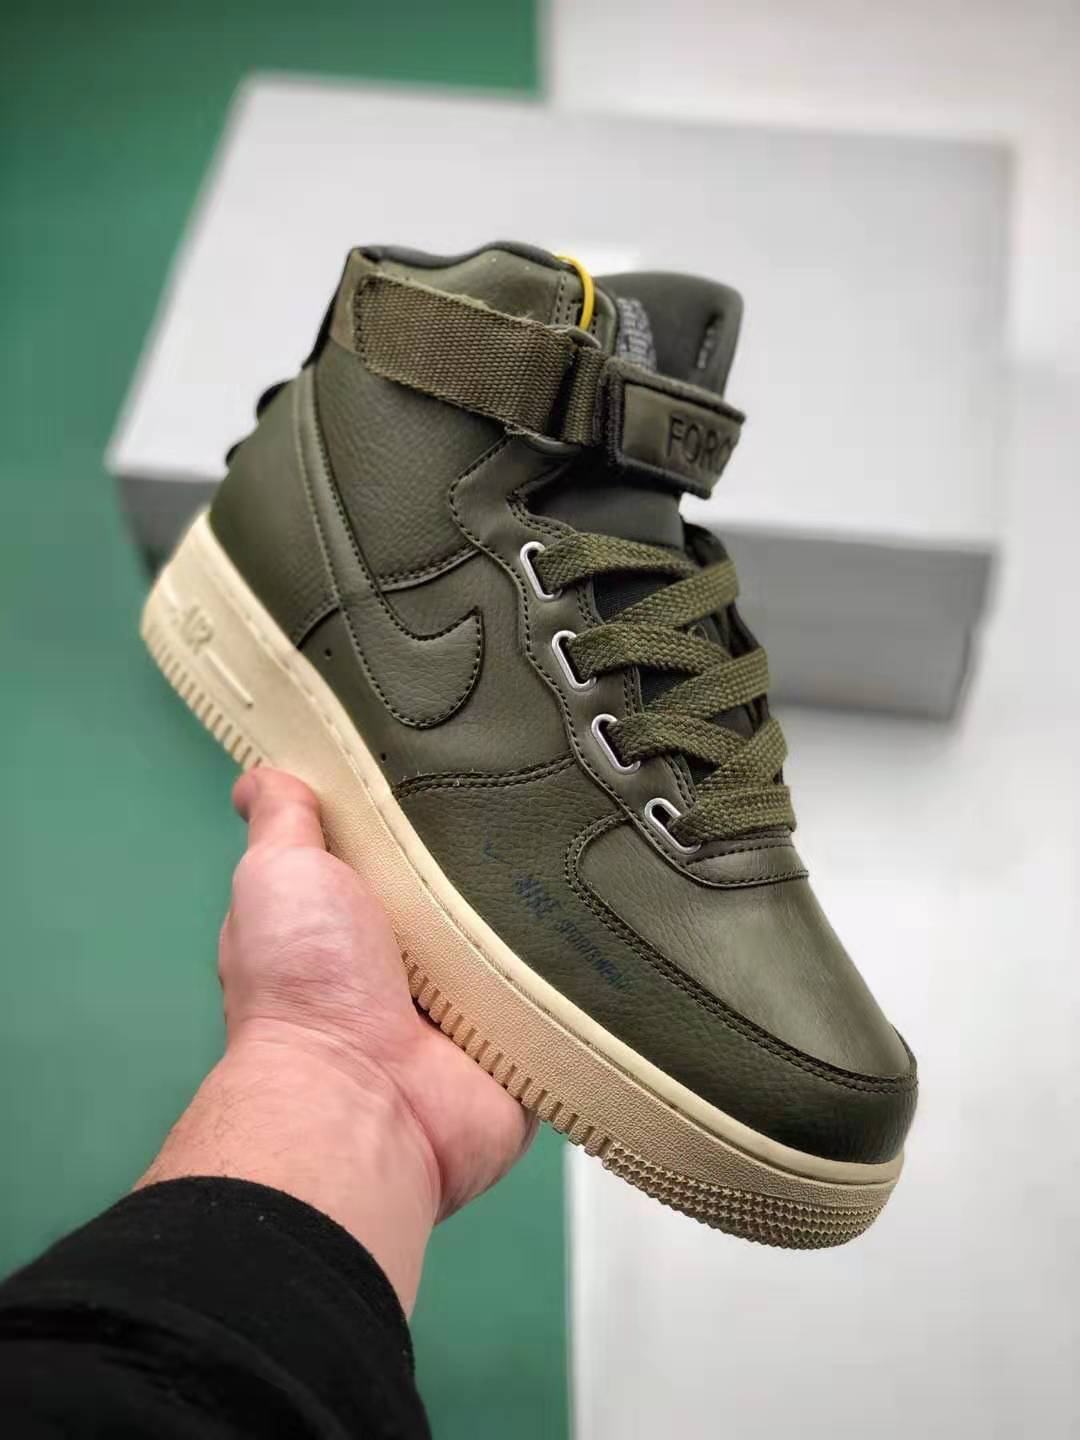 Nike Air Force 1 High Utility Olive Canvas AJ7311-300 - Stylish and Functional Footwear for Men